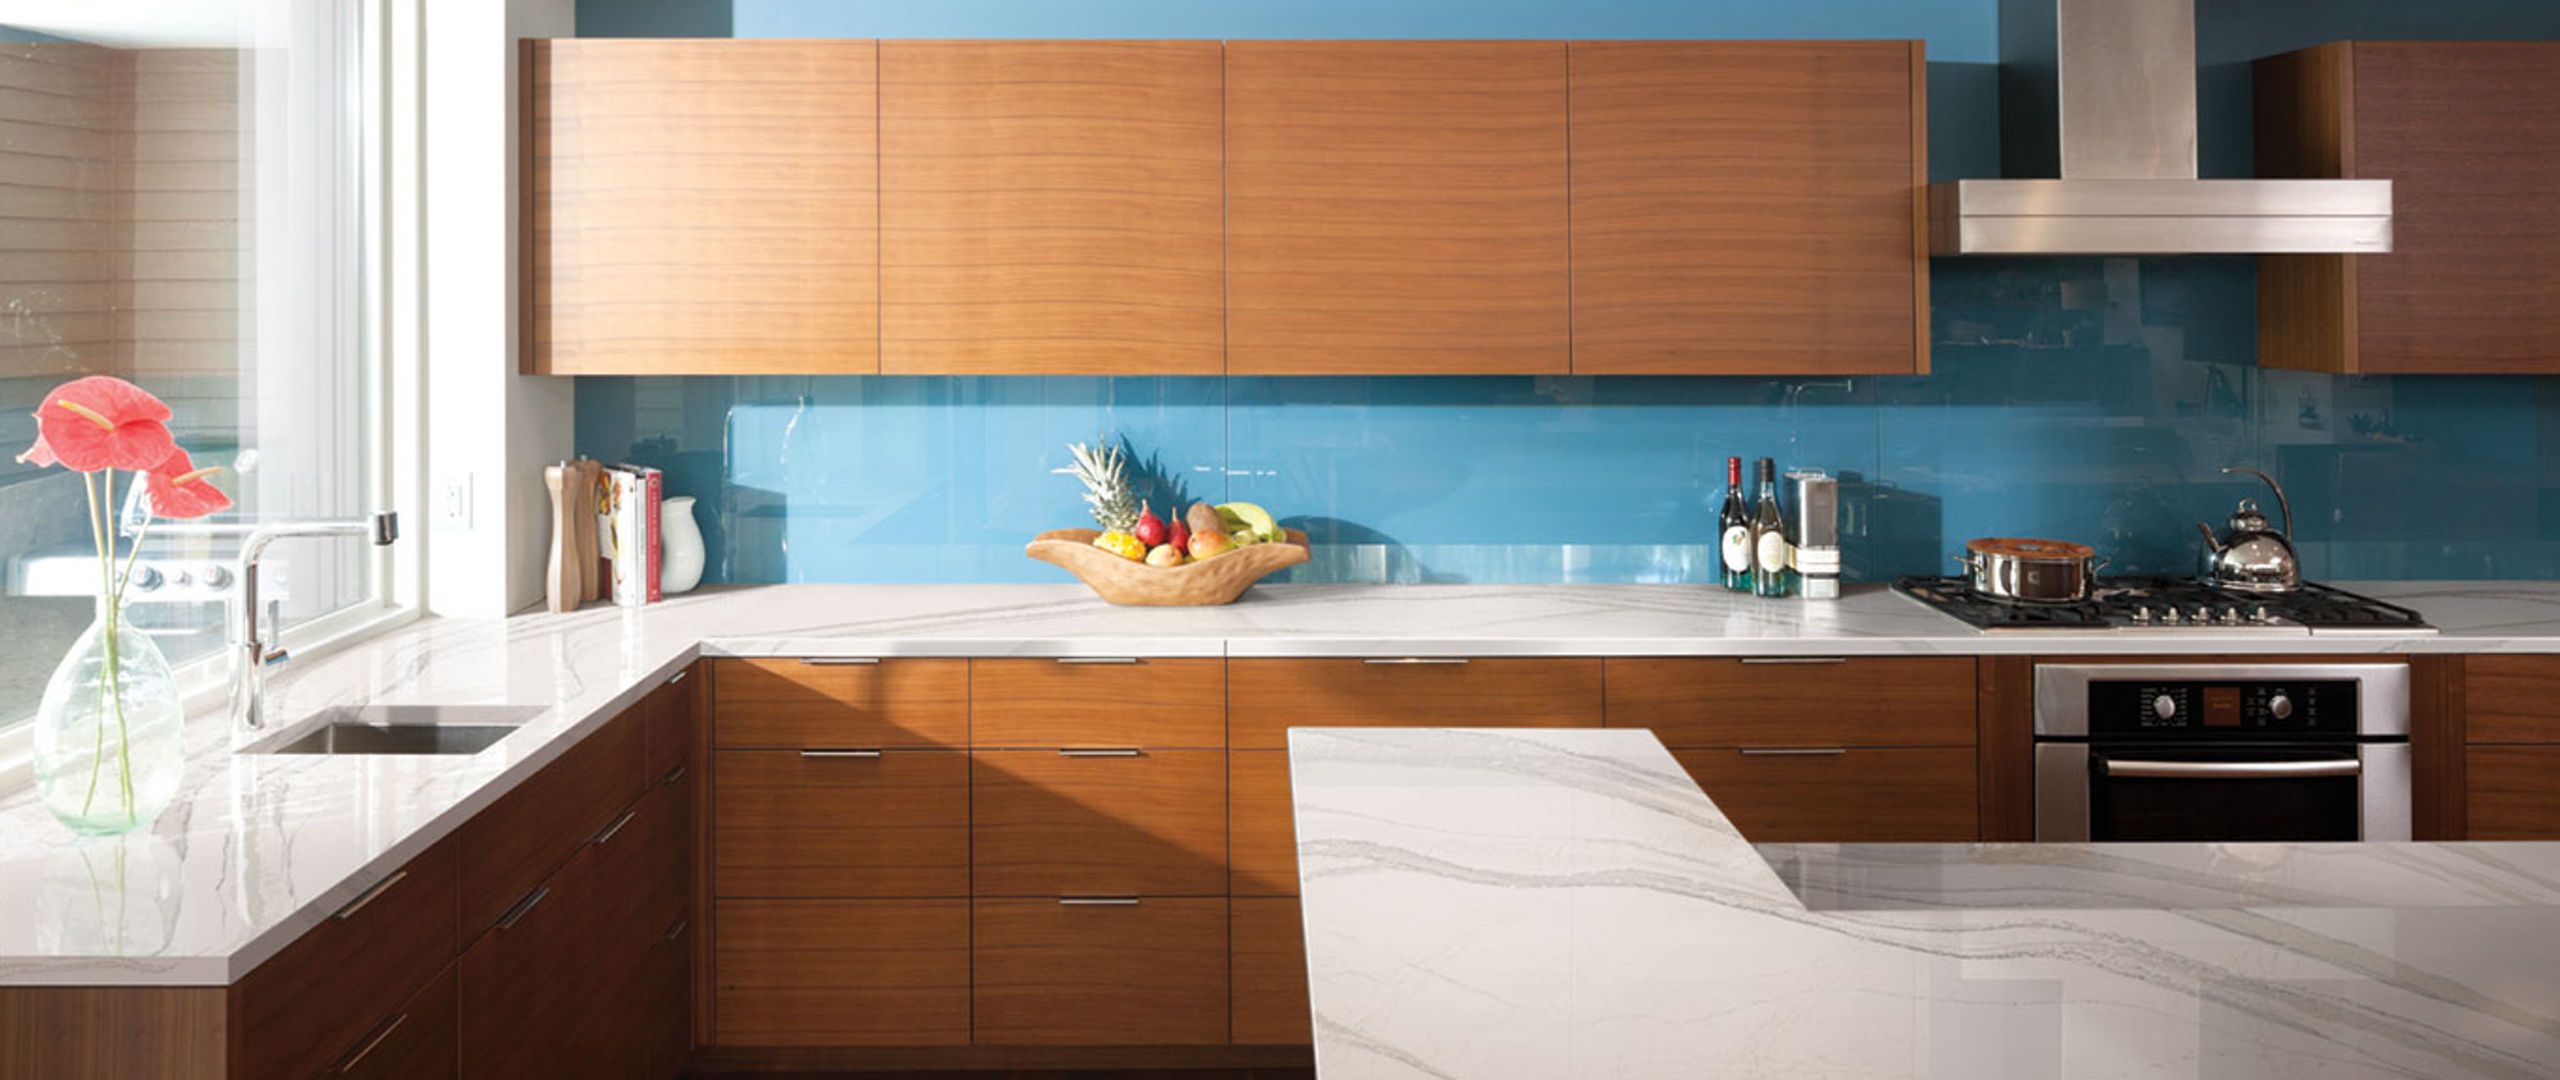 a mid-century modern kitchen with wooden cabinets, a blue backsplash, and white quartz countertops.